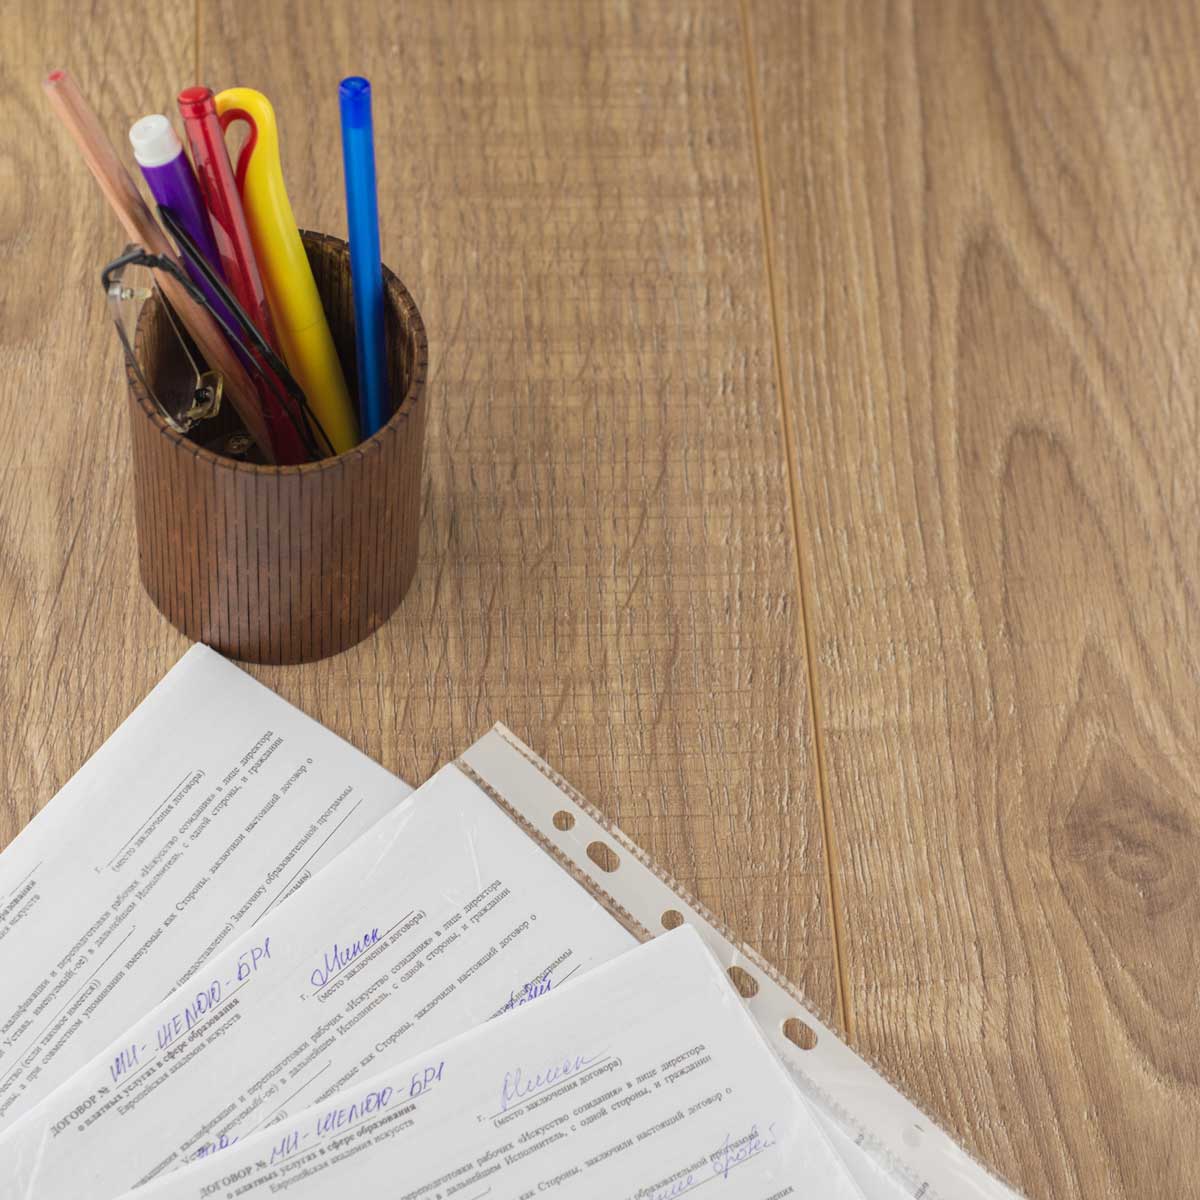 employee contracts and agreements signed and positioned in the corner of the image. cup of pens and pencils near by on wooden desk